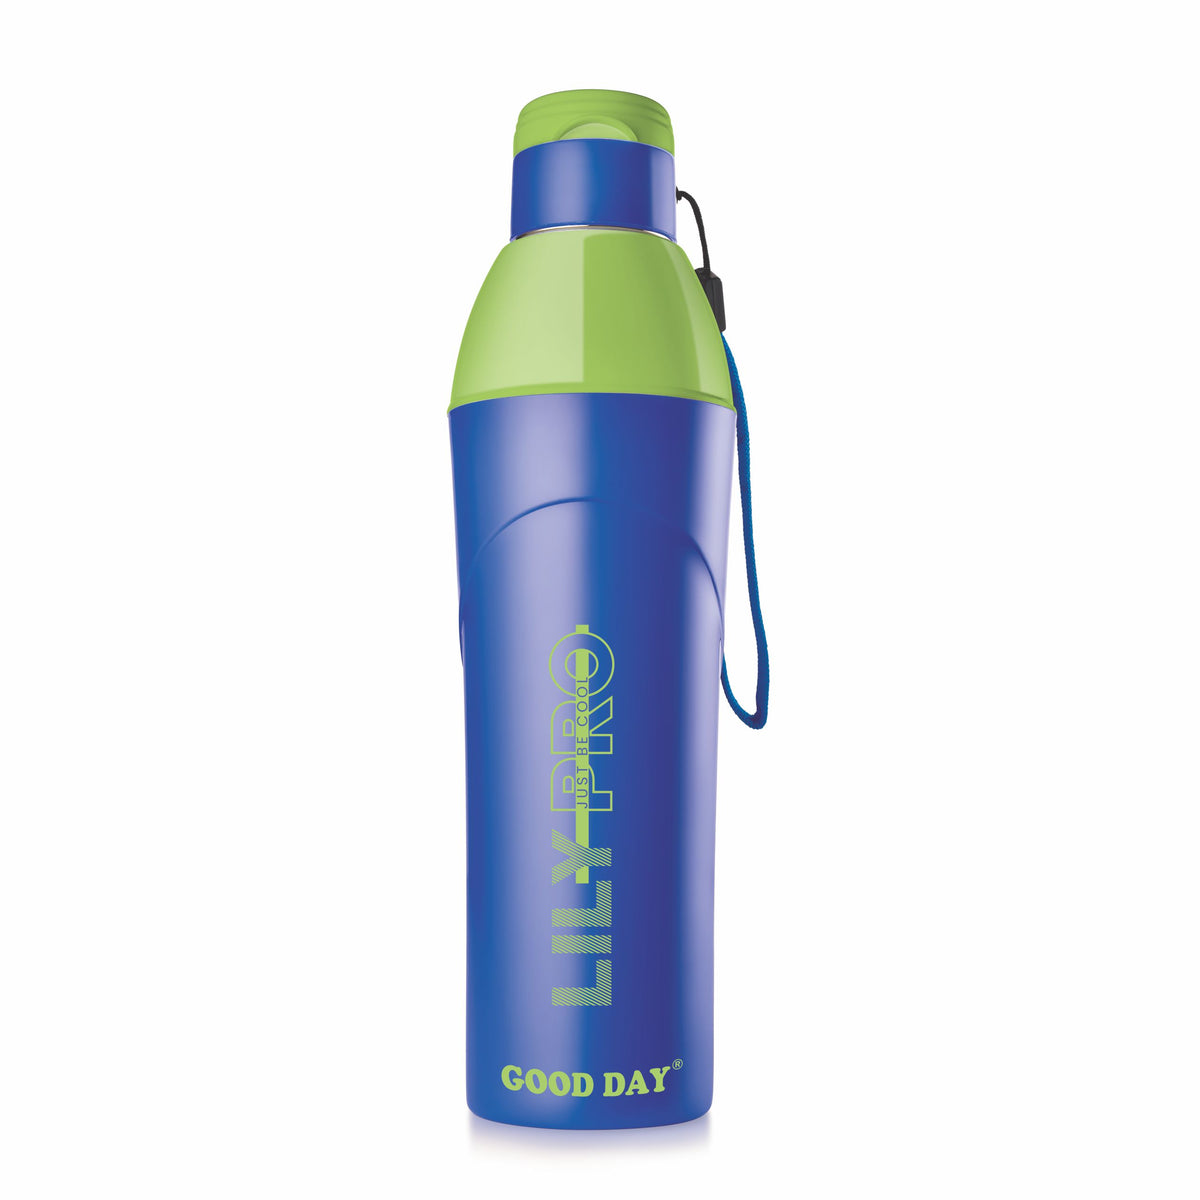 Lily Pro Insulated Bottle